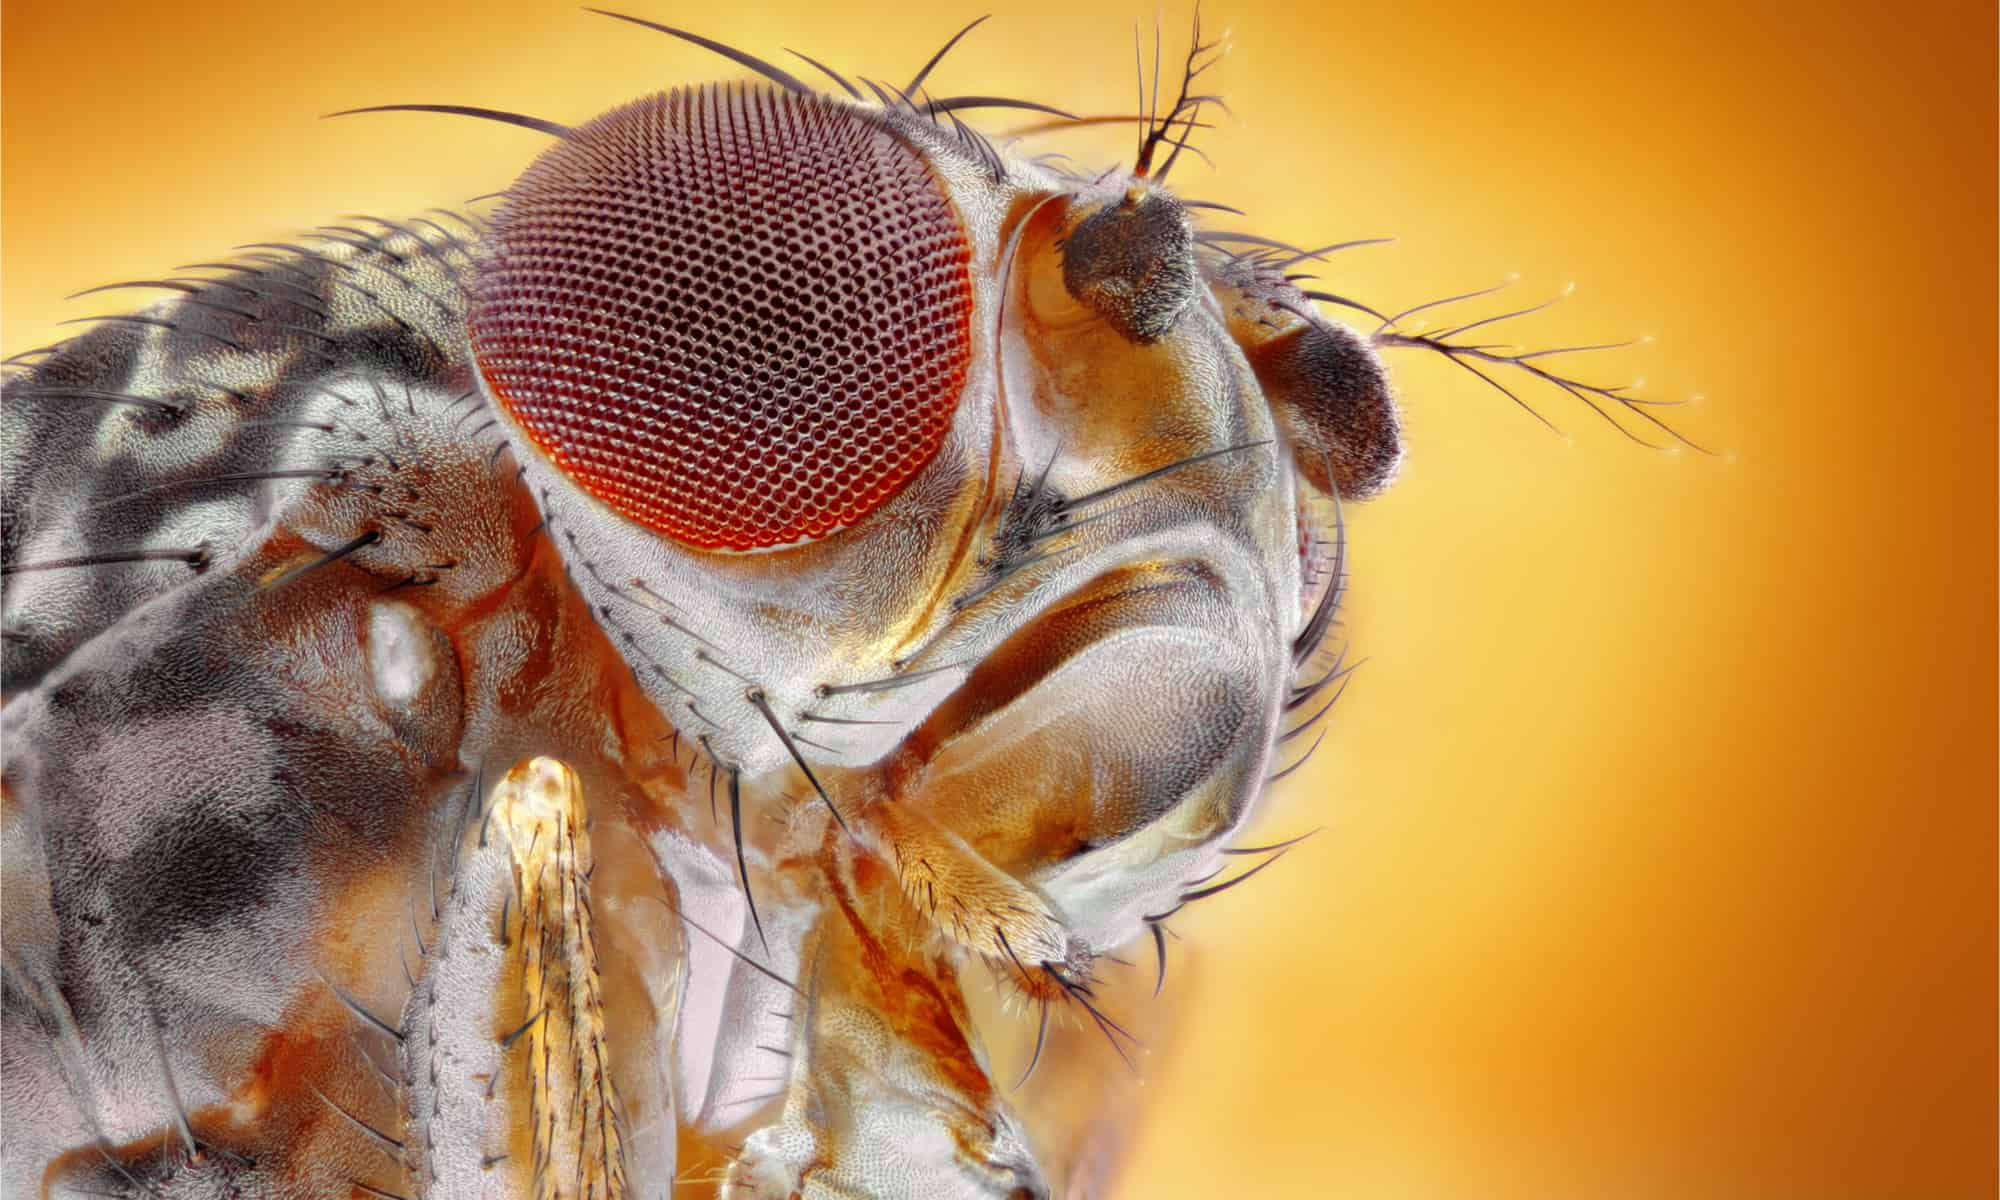 3 Homemade Fruit Fly Traps That Really Work